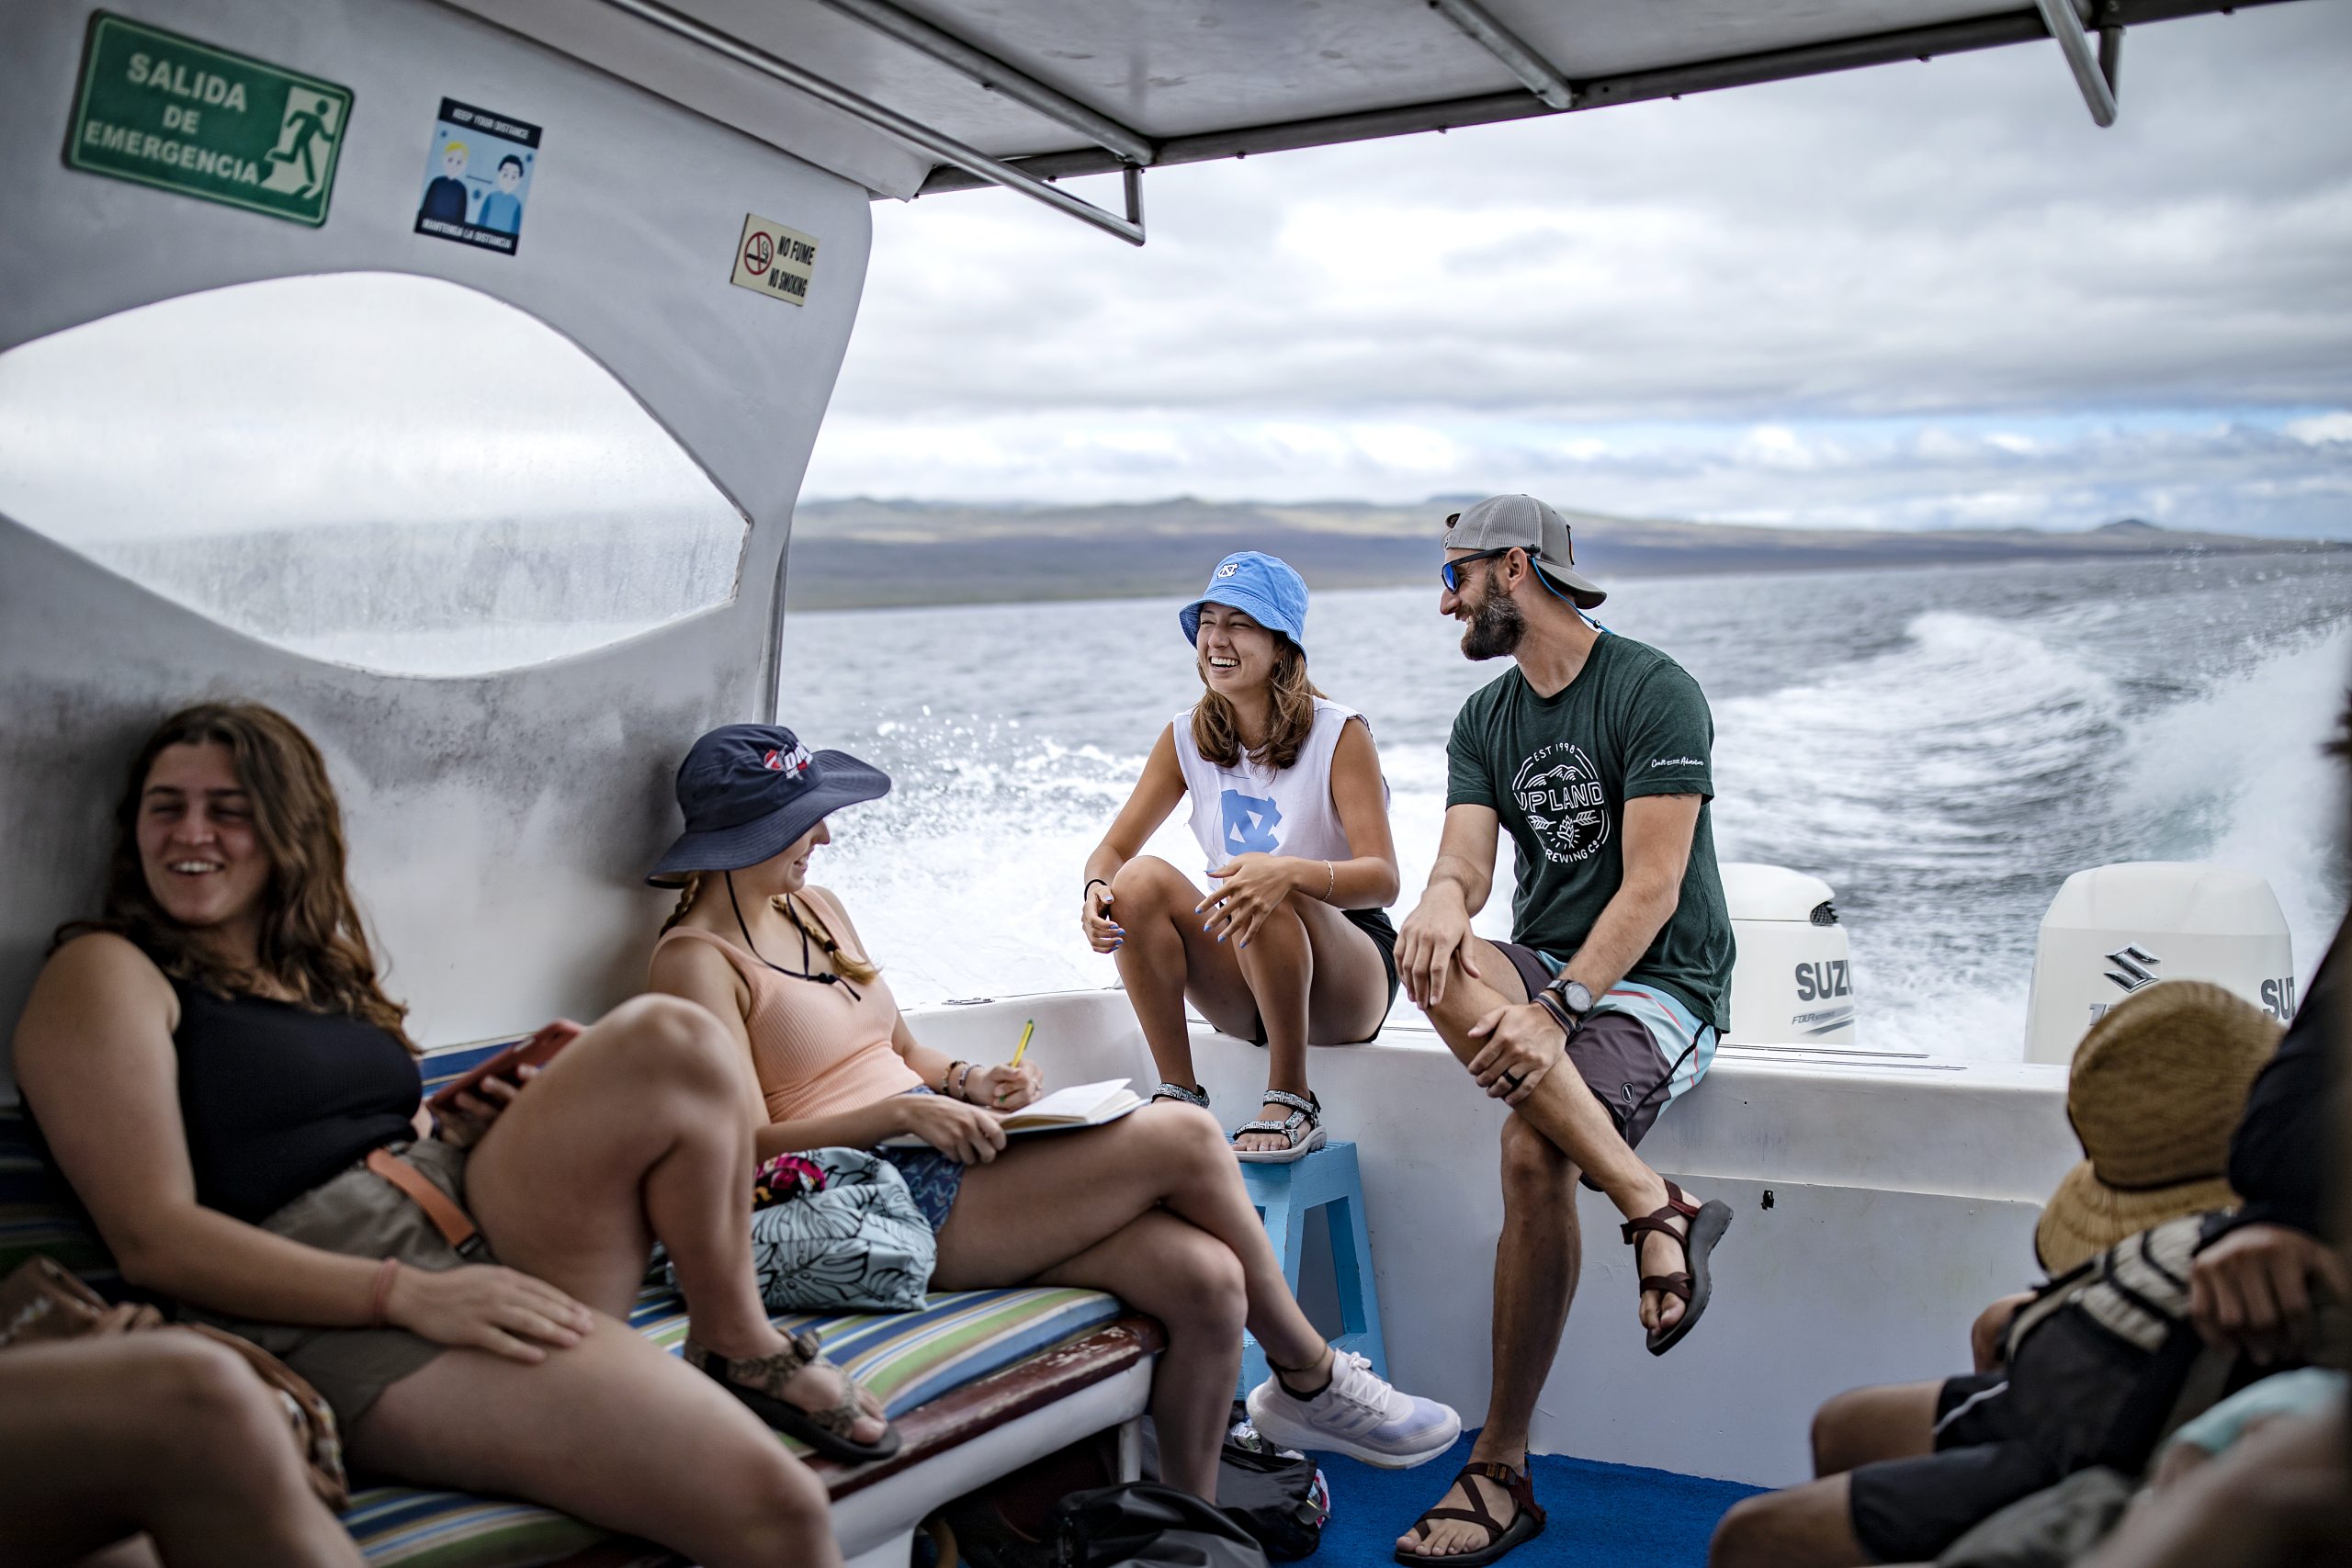 UNC students participate in a field trip during their study abroad class in the Galapagos Islands on July 2, 2022, in Ecuador.